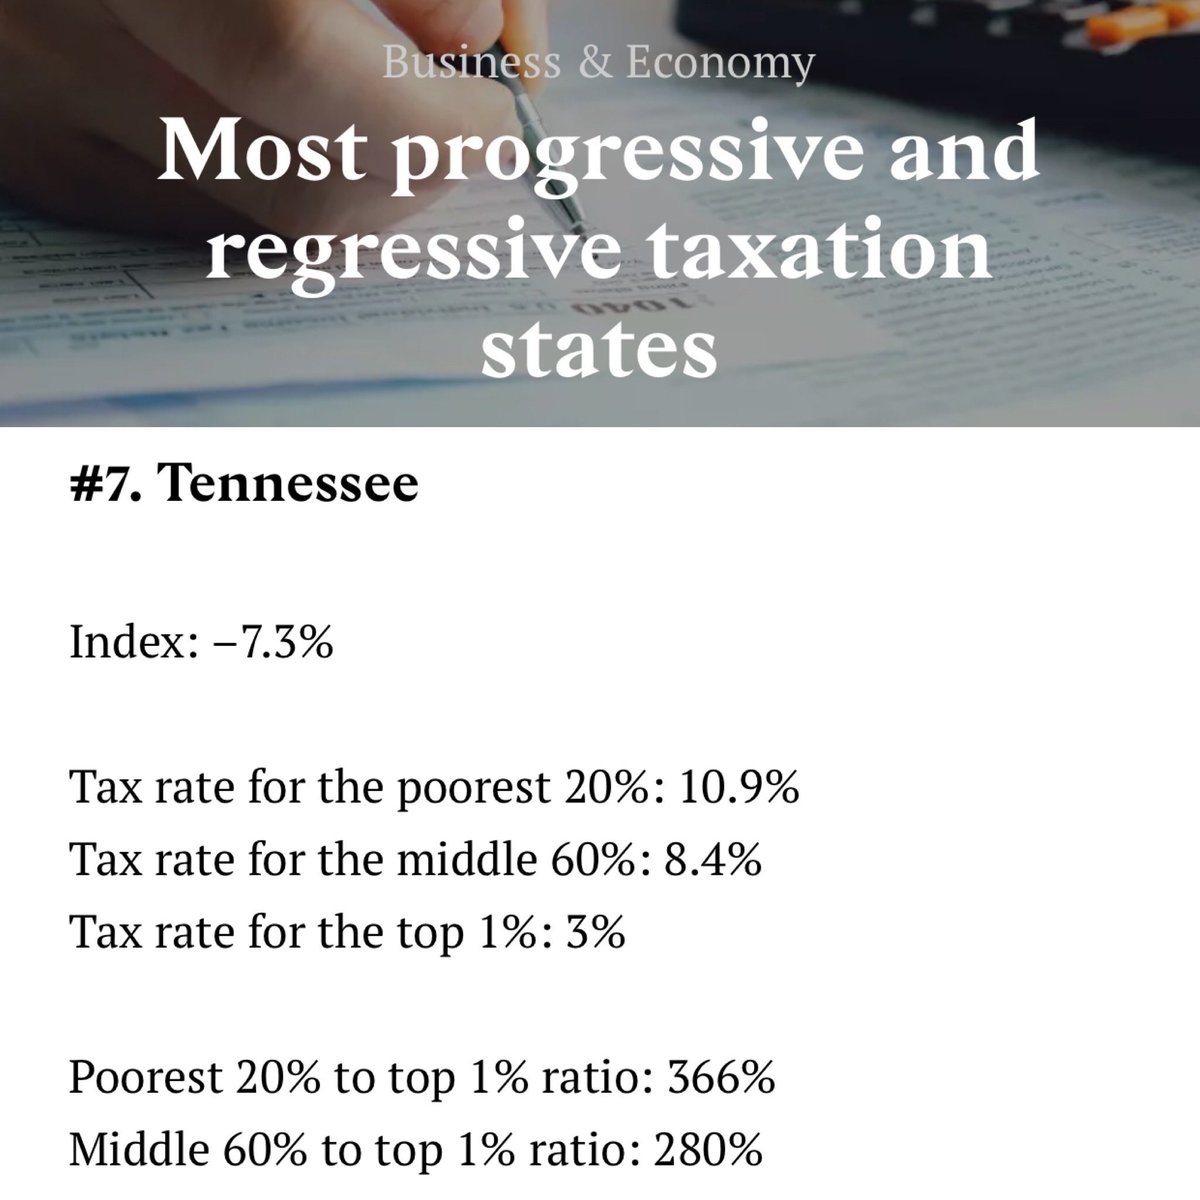 PSA: @GovBillLee keeps saying we’re the lowest taxed state… but that’s only when you group the rich in with the poor. If anything Tennessee has gotten MORE regressive since this 👇🏽 (meaning lower income folks pay a higher % of their income in taxes) stacker.com/business-econo…